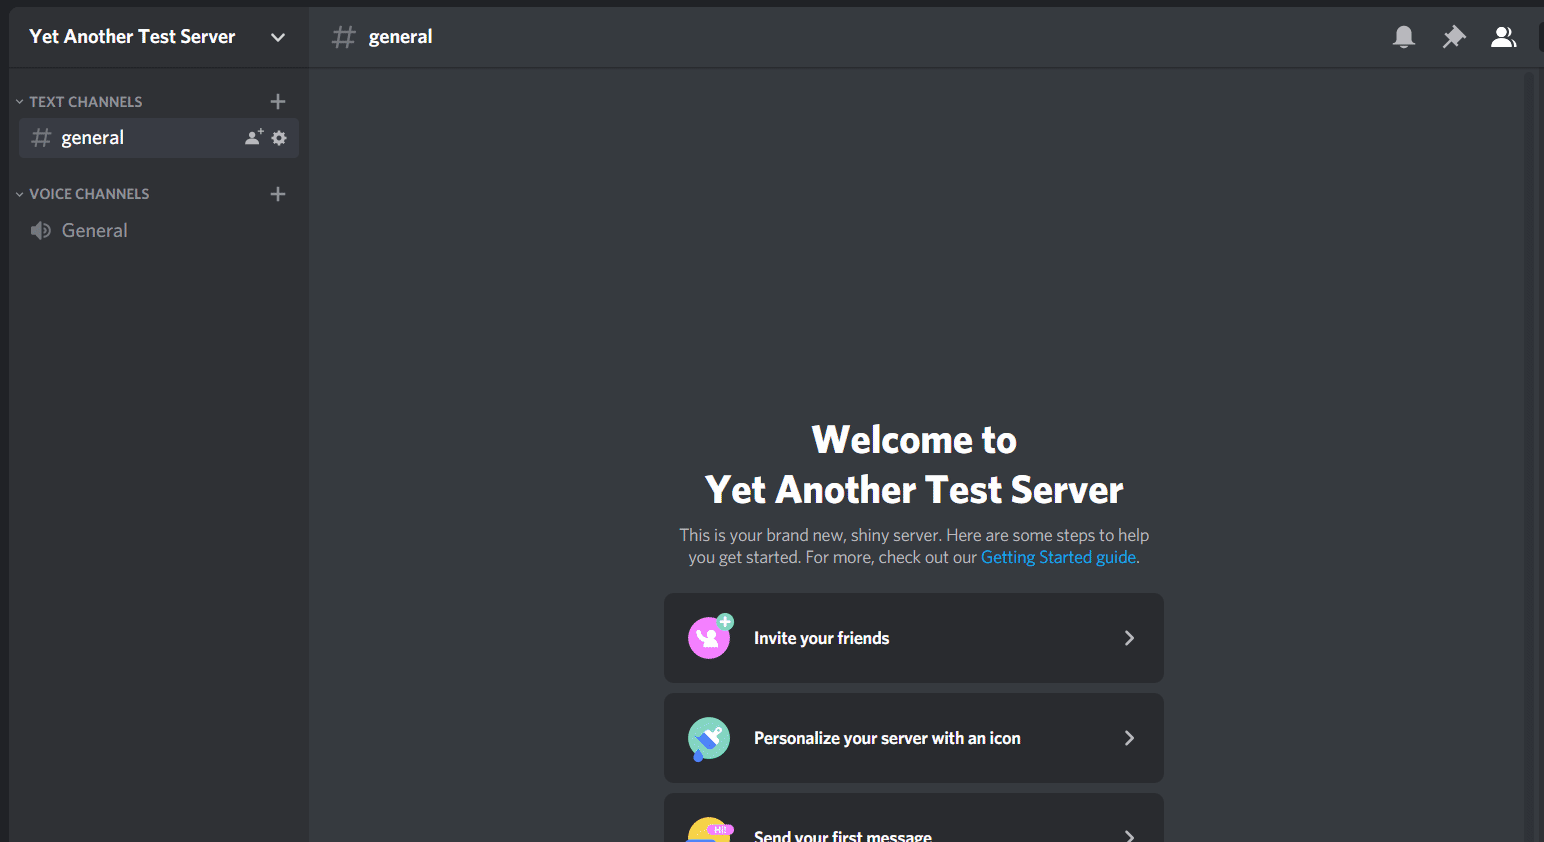 Enabling Your Community Server – Discord